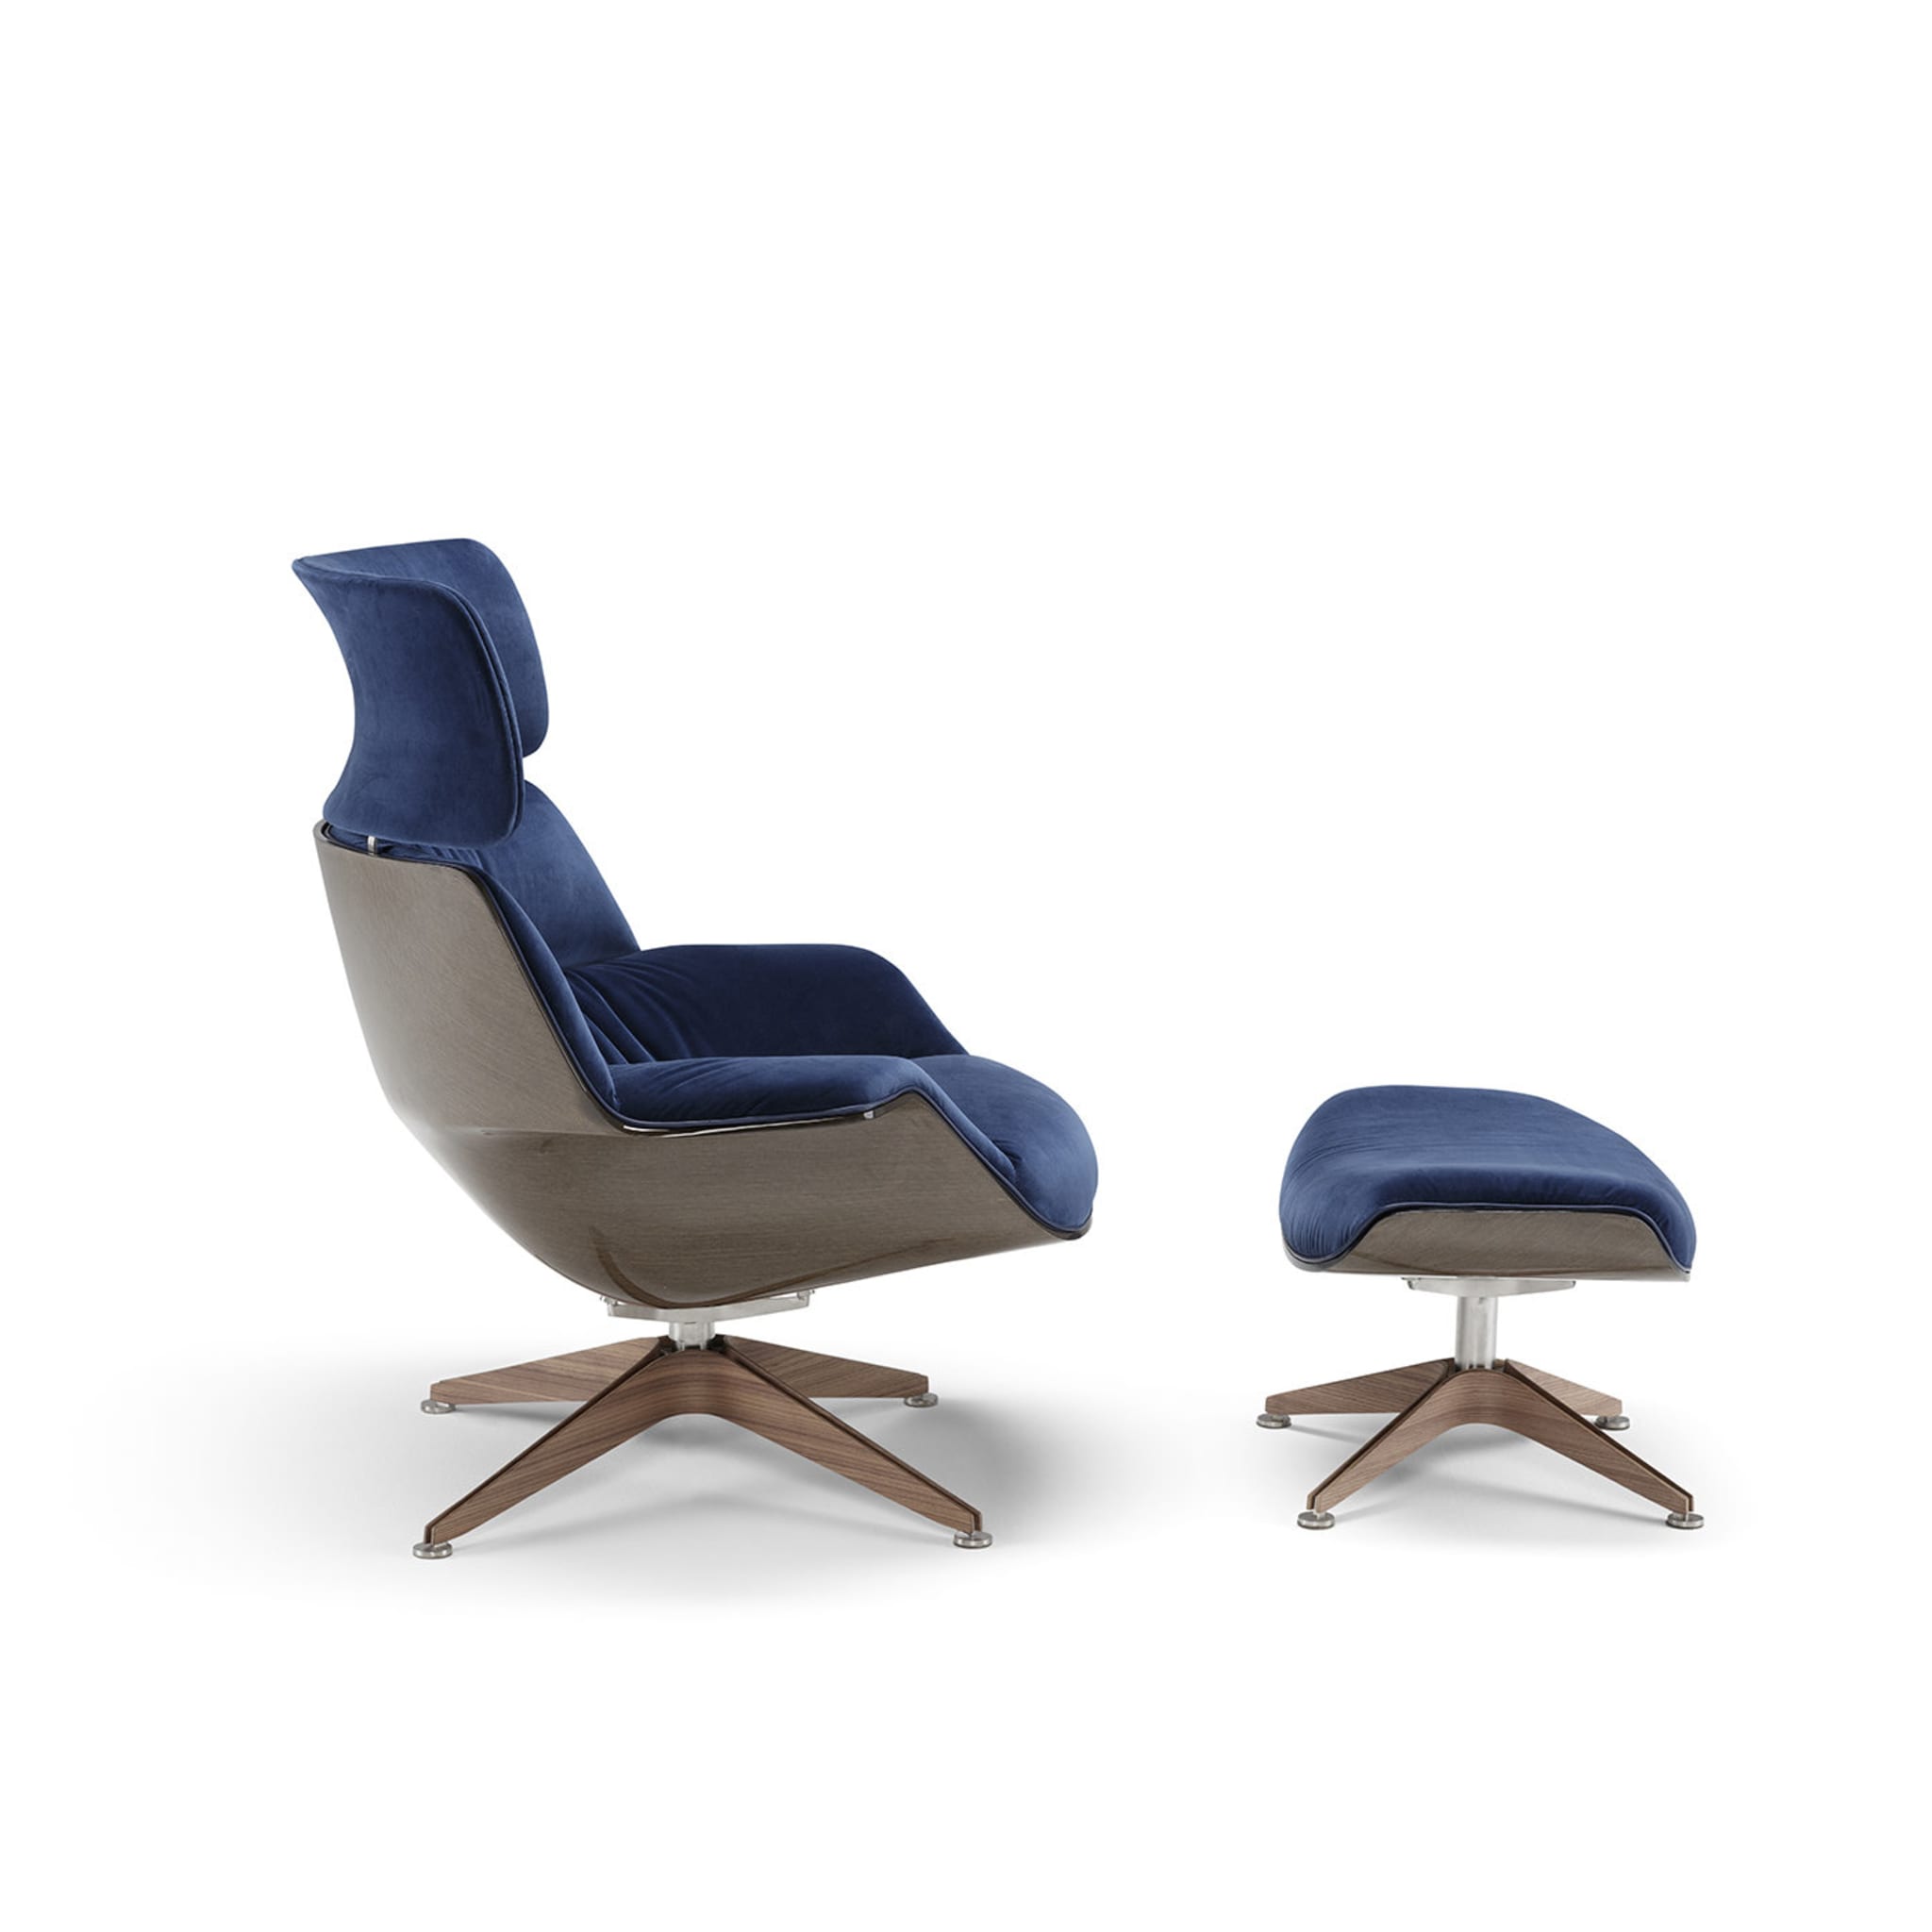 Coach Lounge Chair and Footrest by Jean Marie Massaud - Alternative view 1